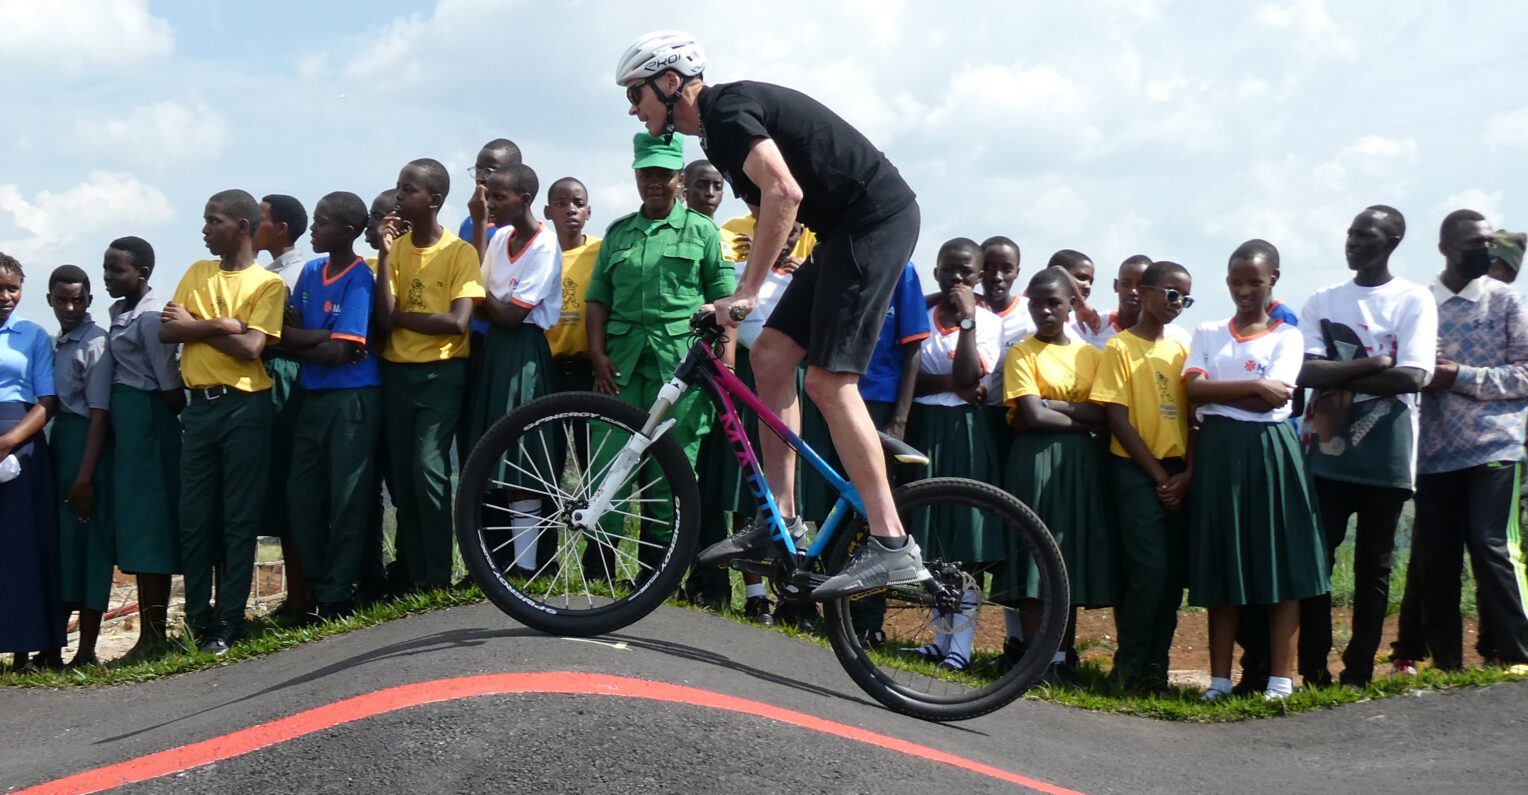 Chris Froome at the Field of Dreams